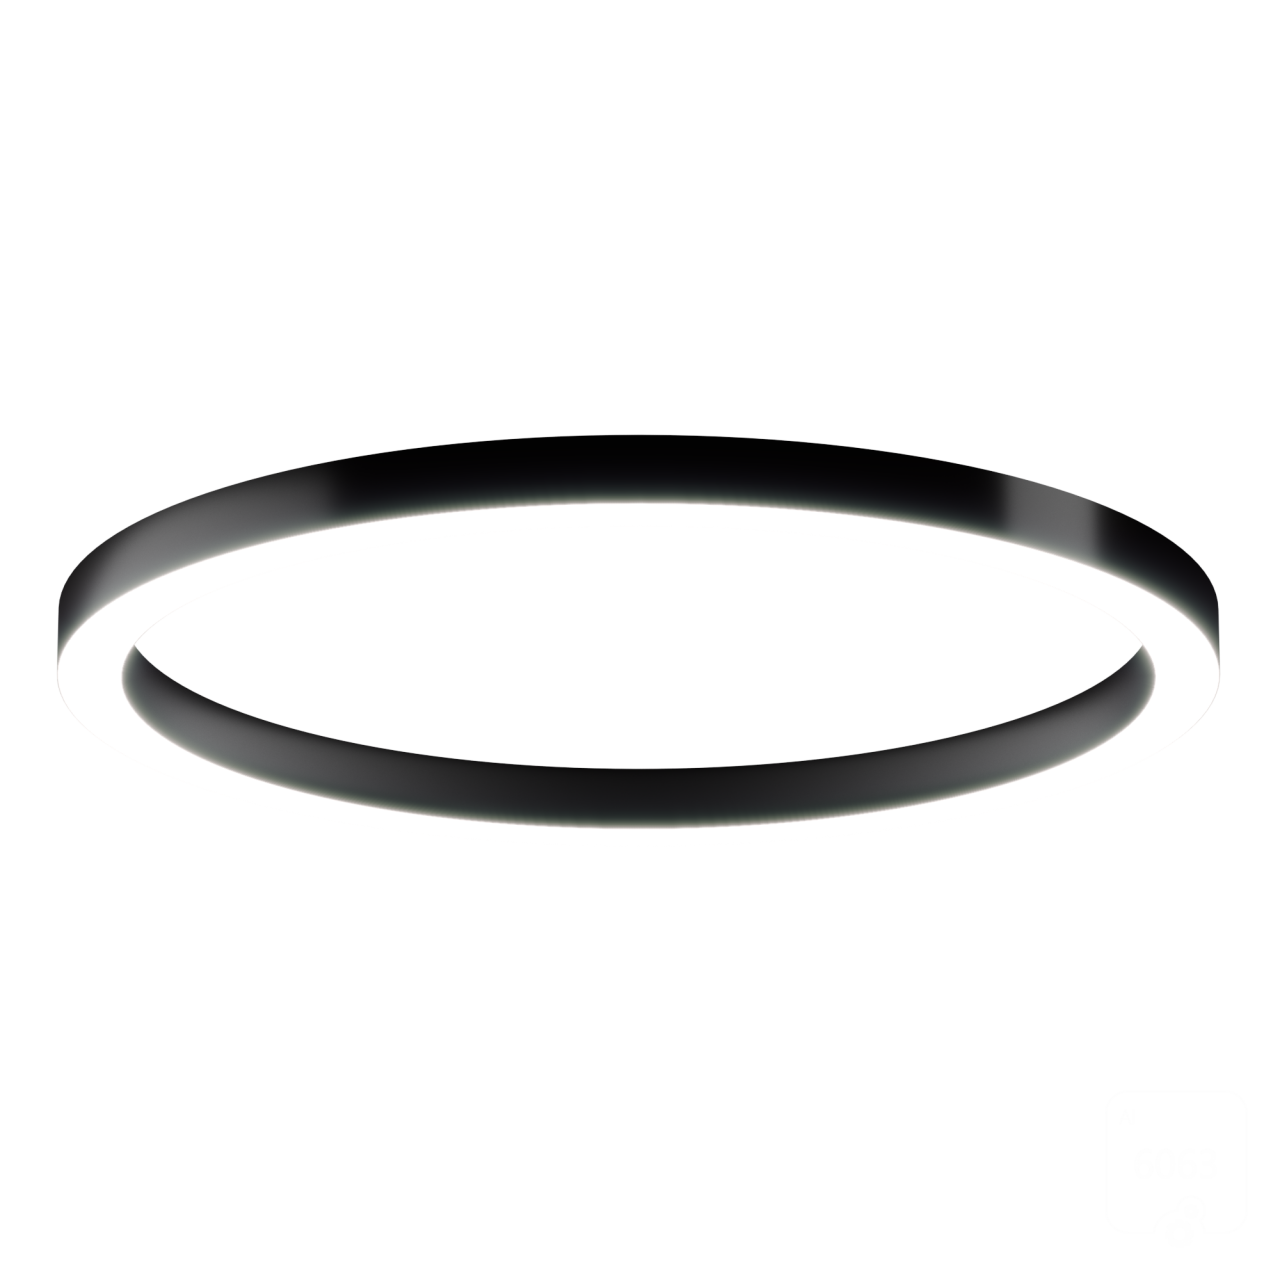 A series of ring shaped LED pendant lights with an LED strip.